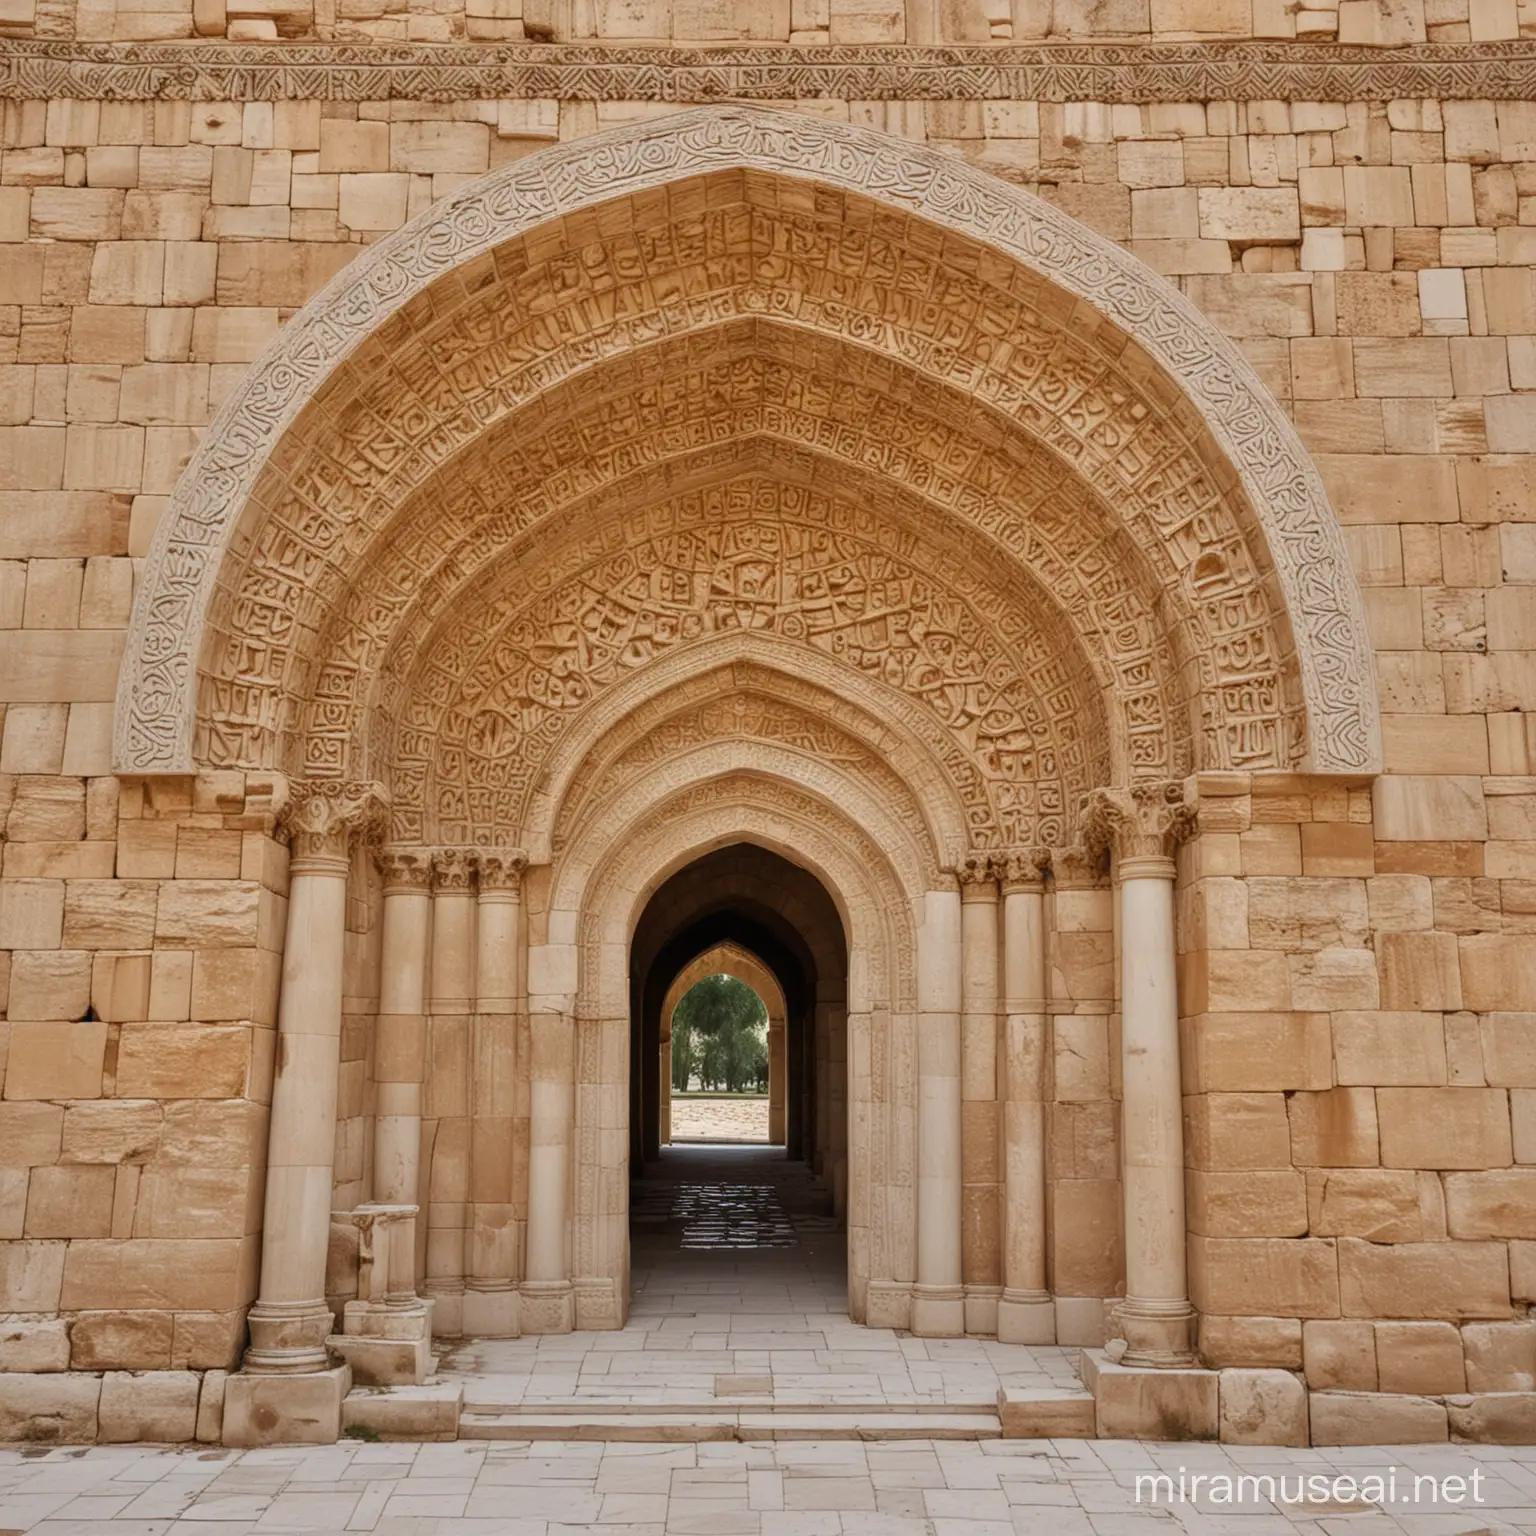 Umayyad Palace Courtyard with Ornate Archways and Fountain